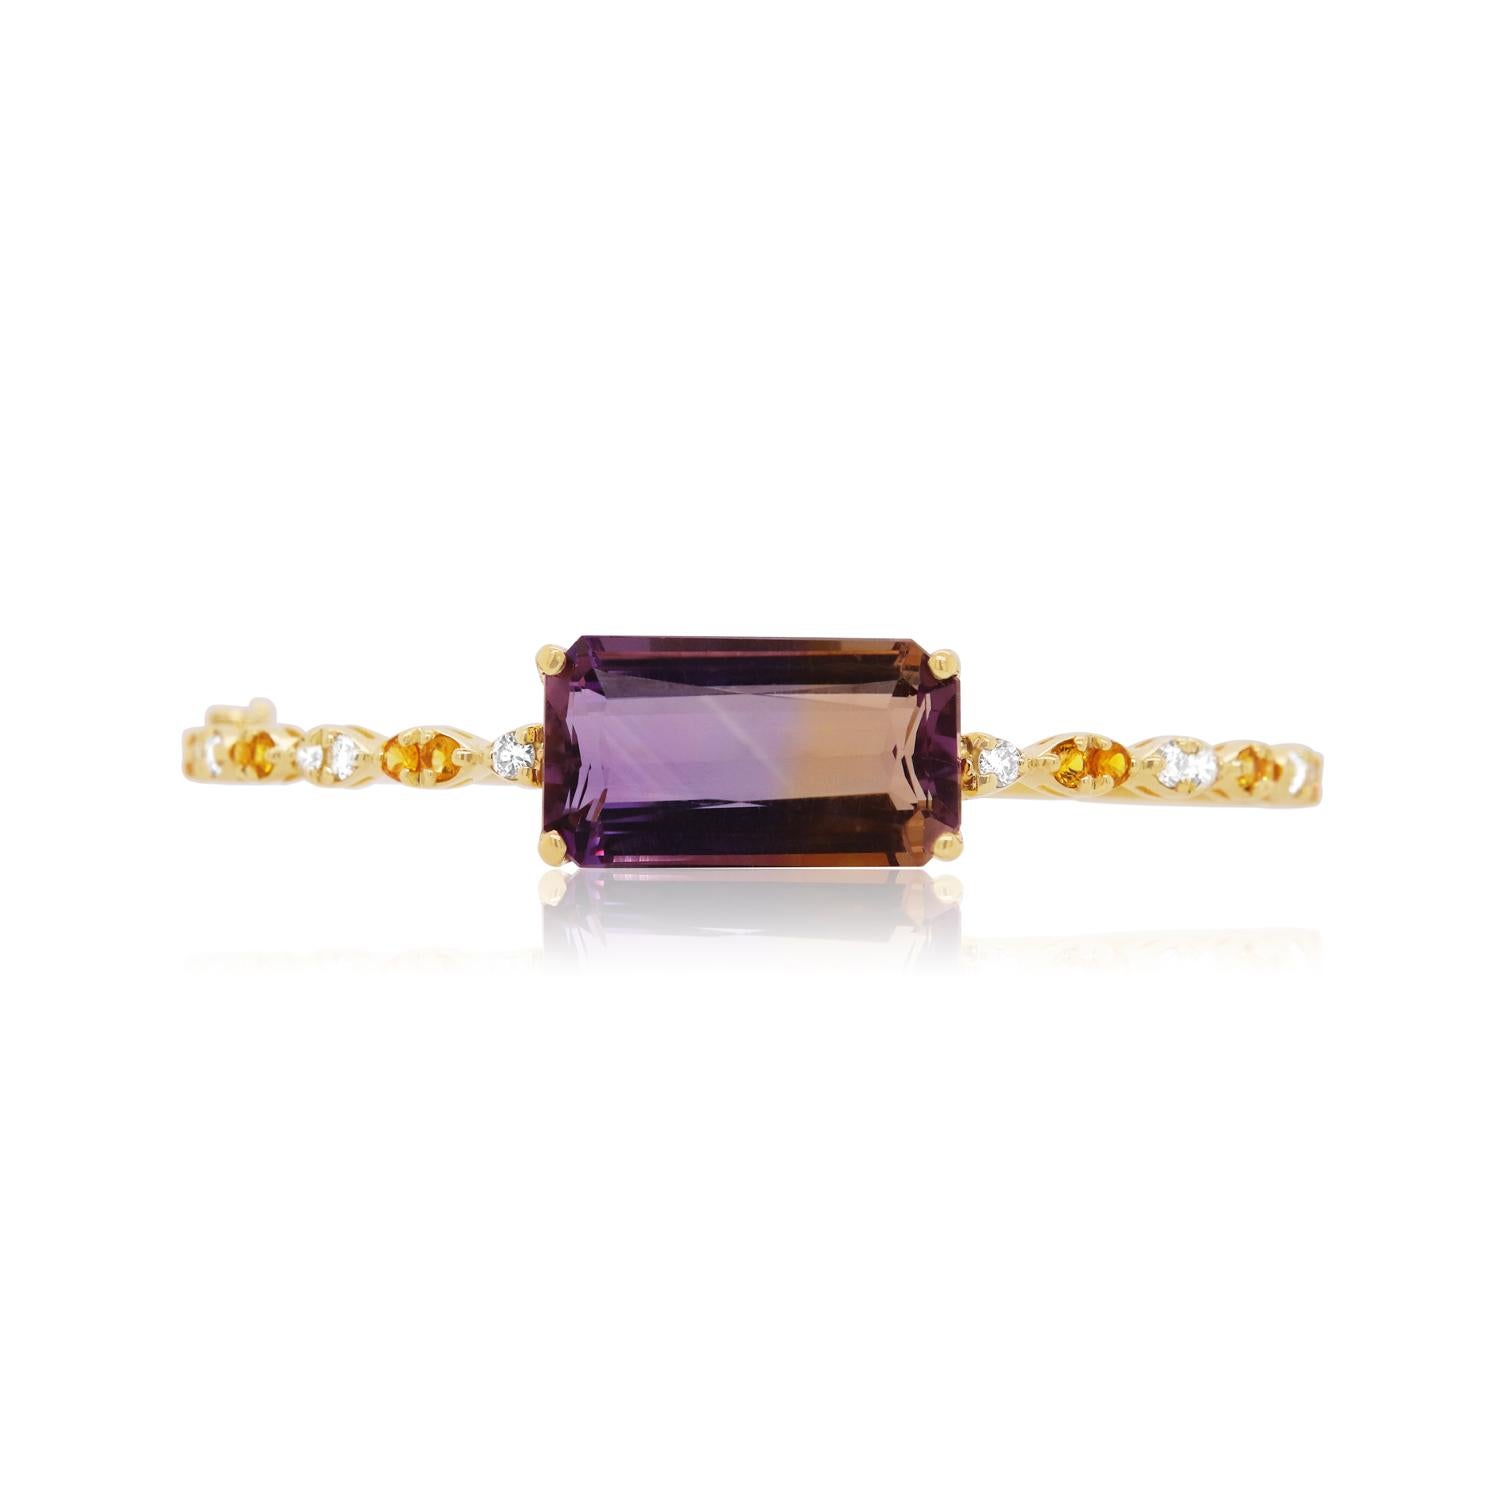 Contemporary Emerald Cut Ametrine 14K Yellow Gold Diamond Bangle with Yellow Sapphires For Sale